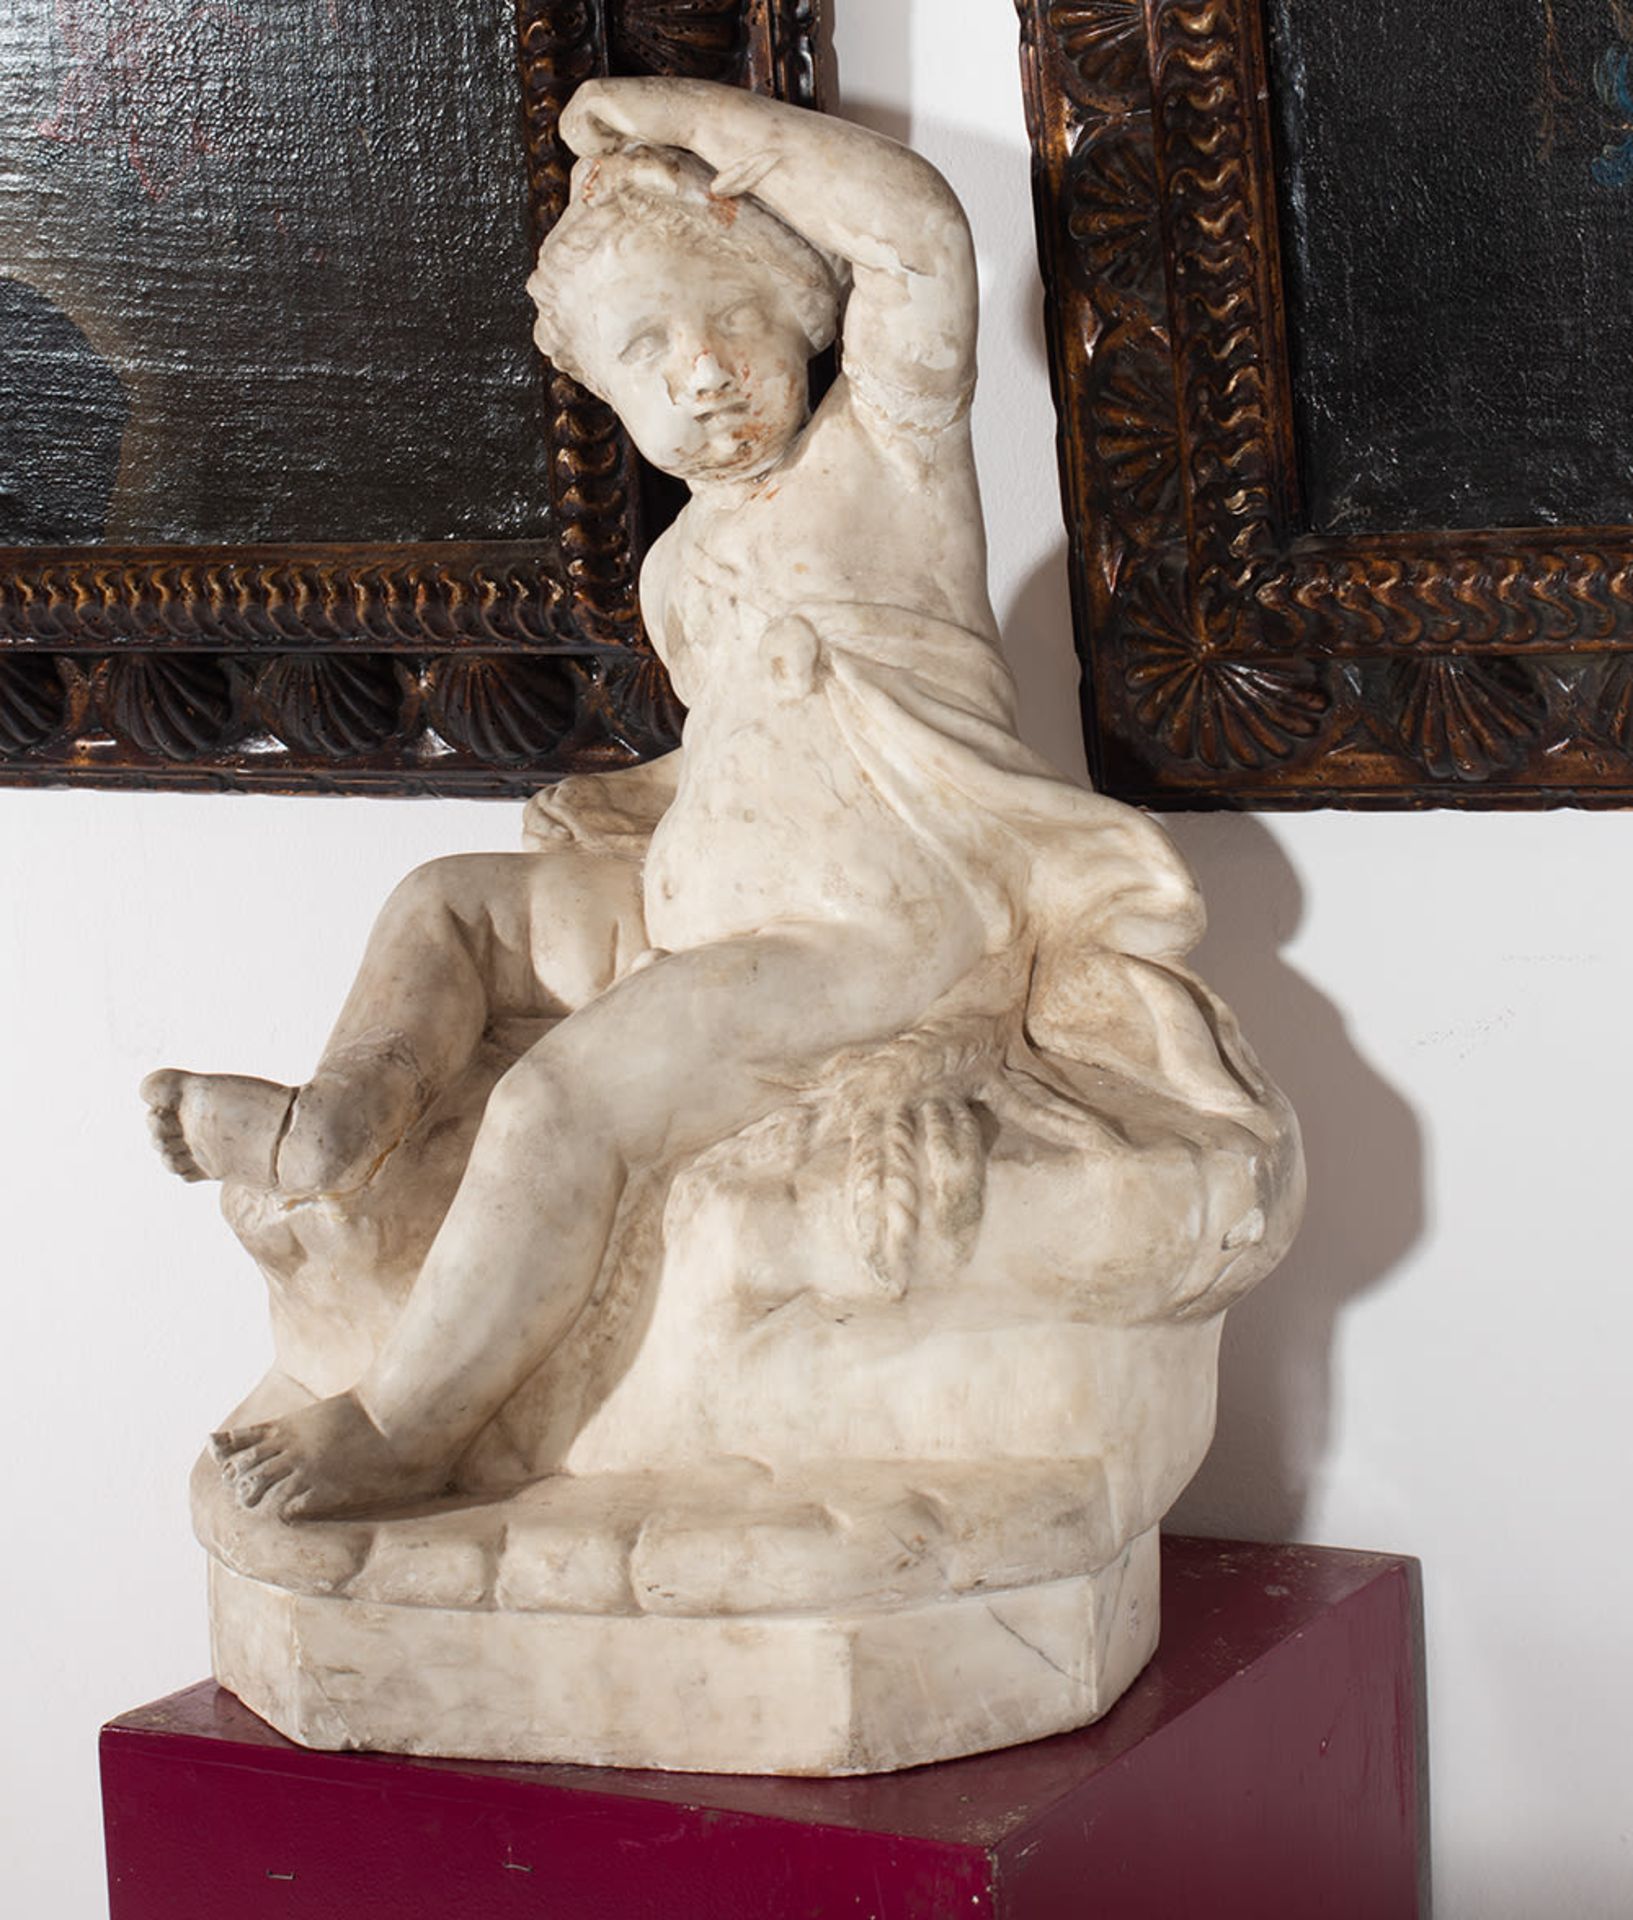 Putto, italy, 16th - 17th centuries - Image 2 of 6